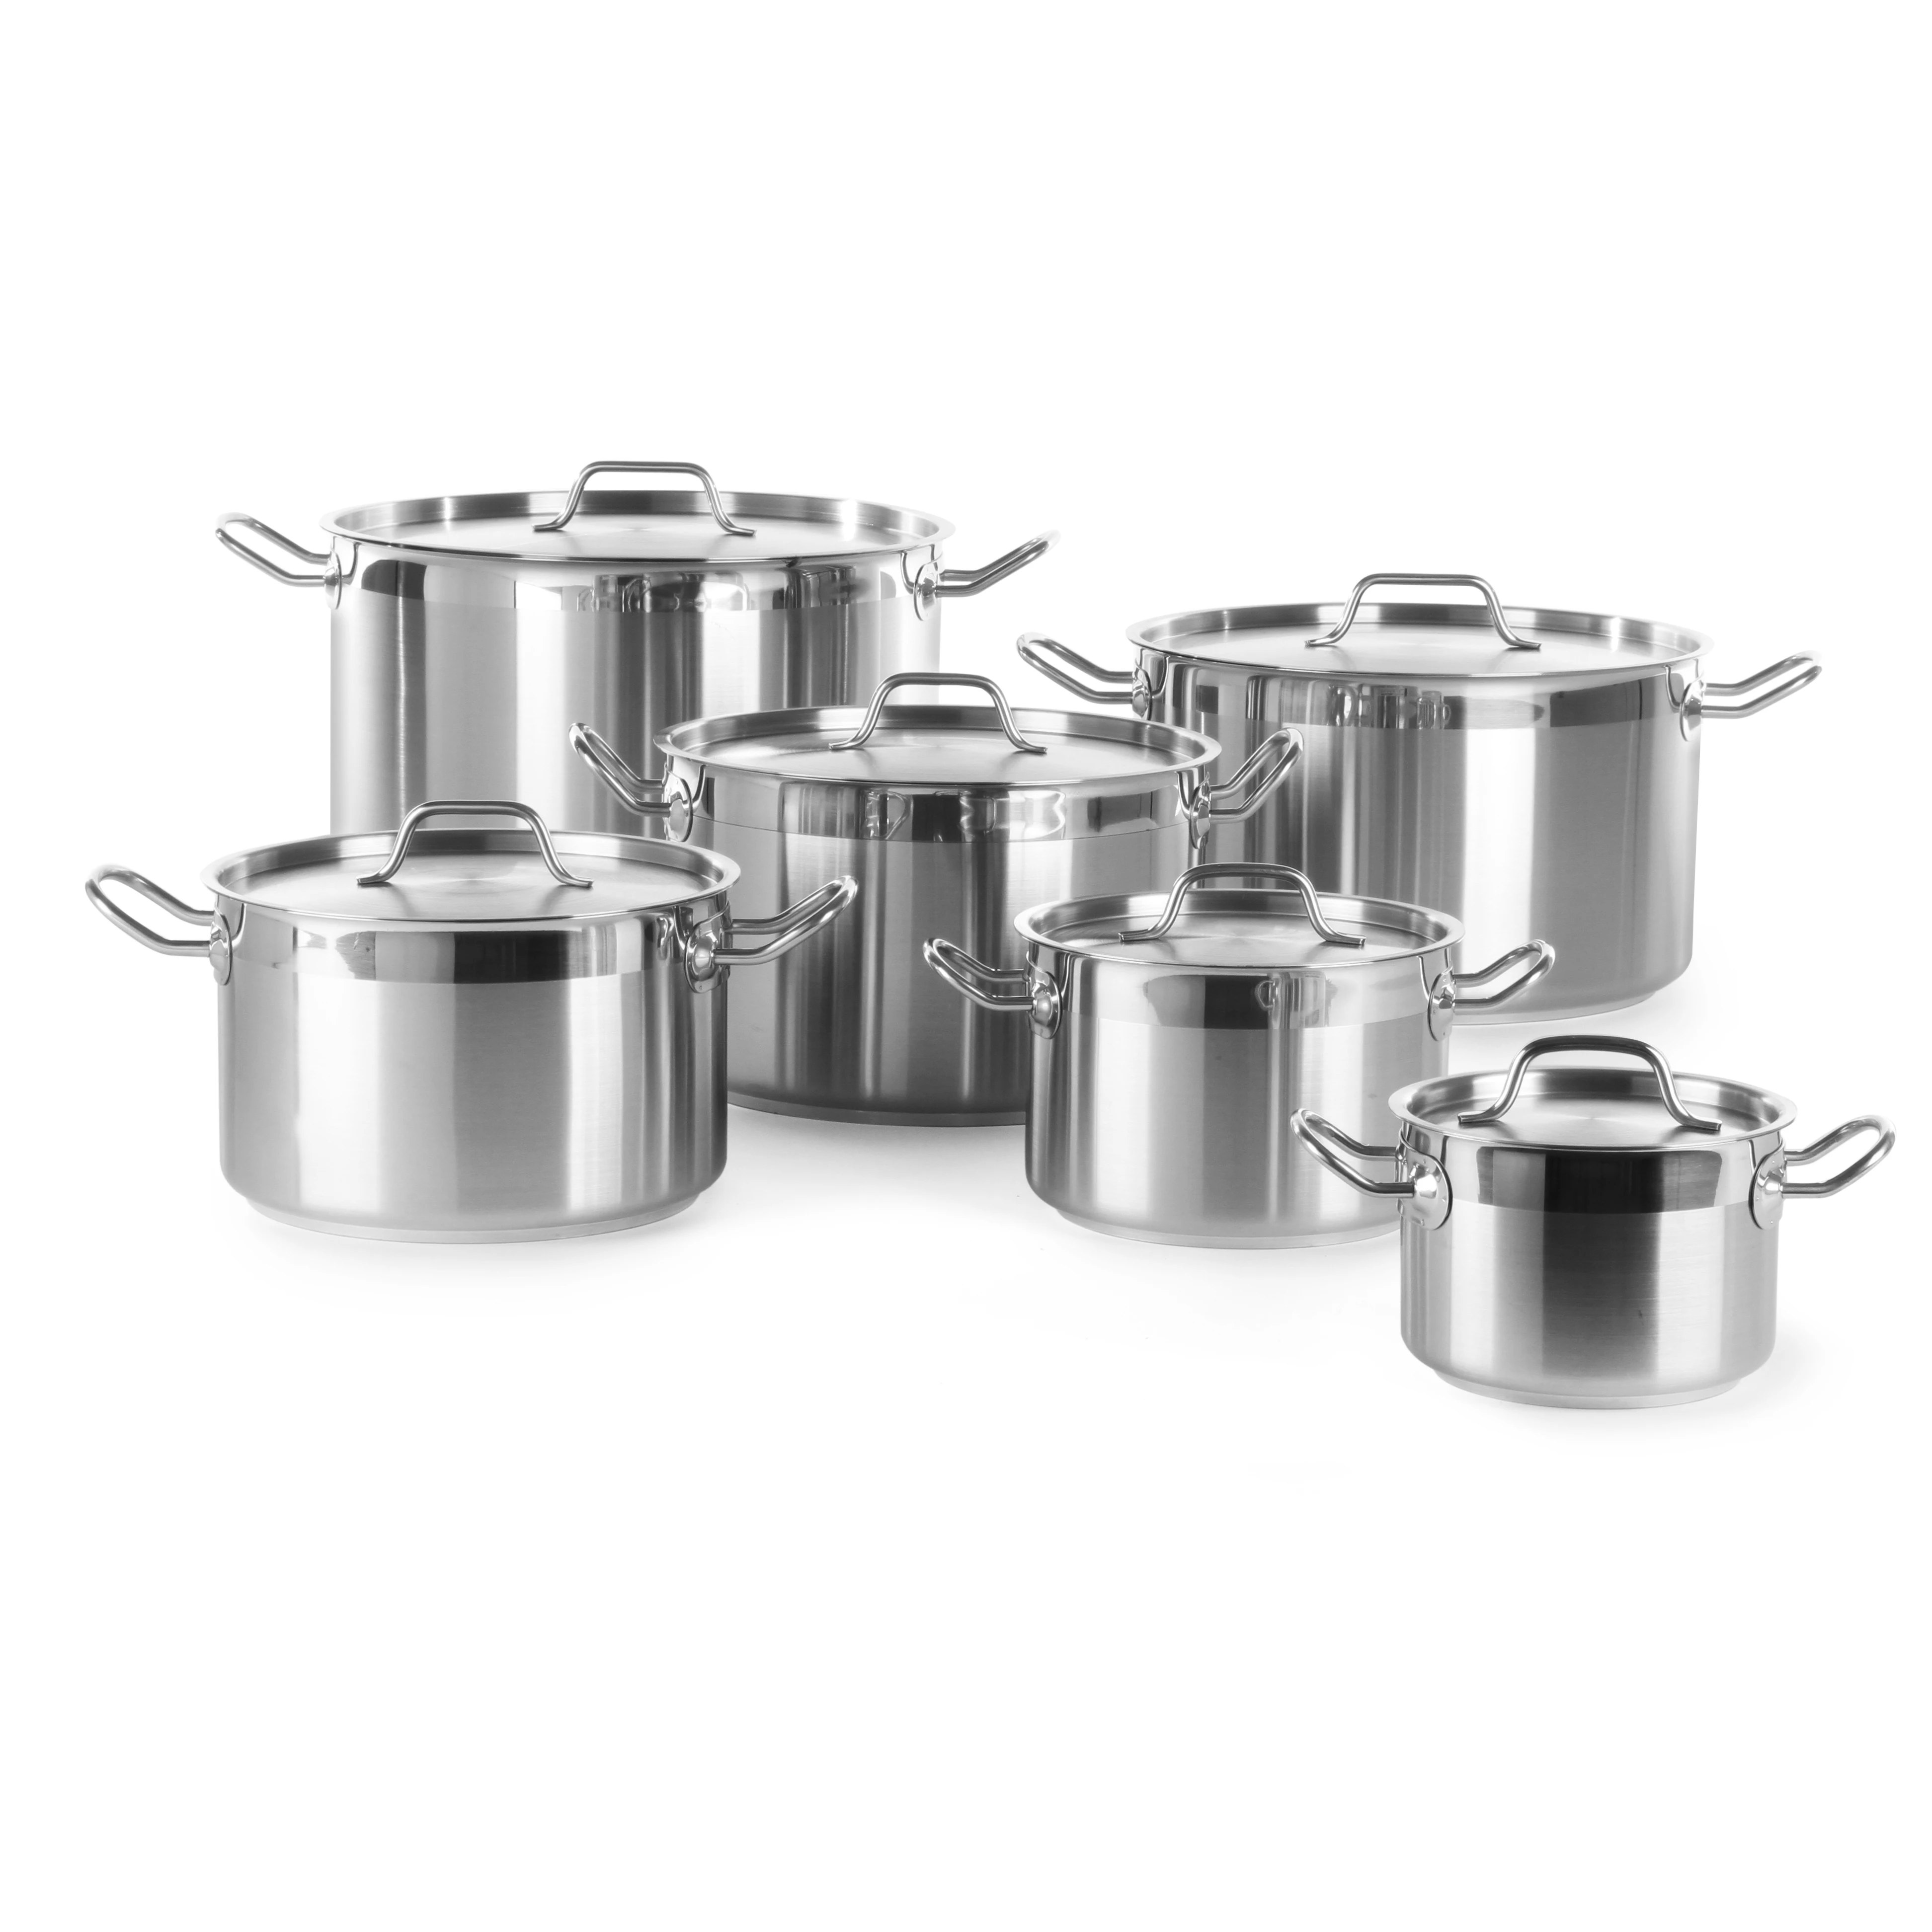 Best Brand NSF Listed Clad & Induction Bottom Surgical Steel Waterless Parini  Cookware Reviews - Buy Best Brand NSF Listed Clad & Induction Bottom  Surgical Steel Waterless Parini Cookware Reviews Product on